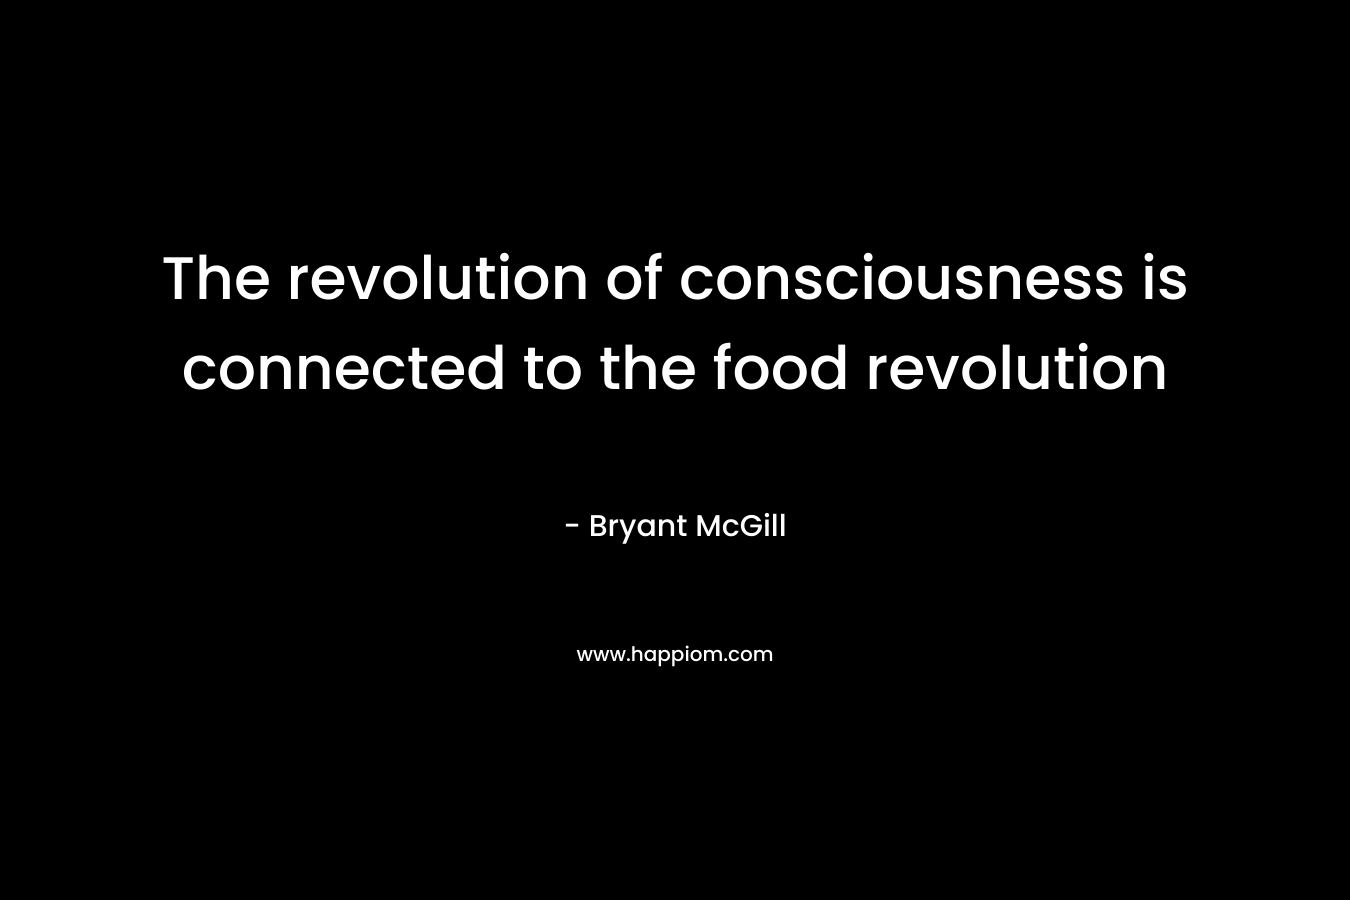 The revolution of consciousness is connected to the food revolution – Bryant McGill